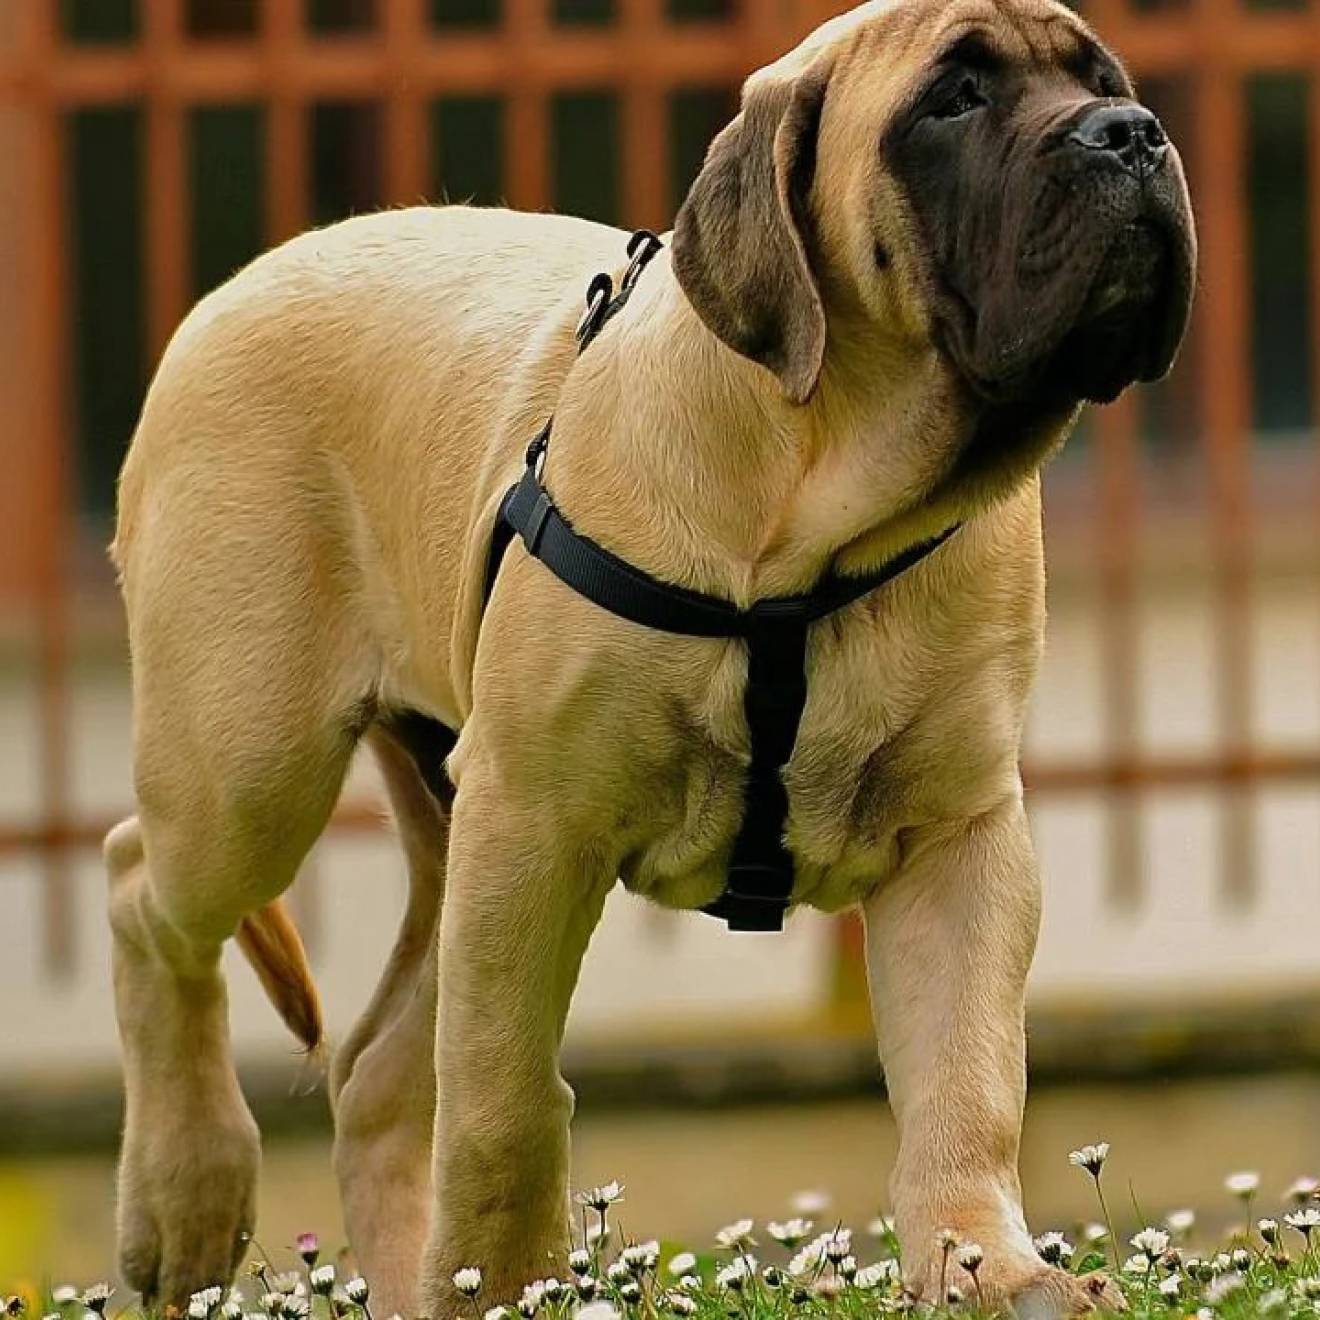 A mastiff-type puppy in a harness looks up